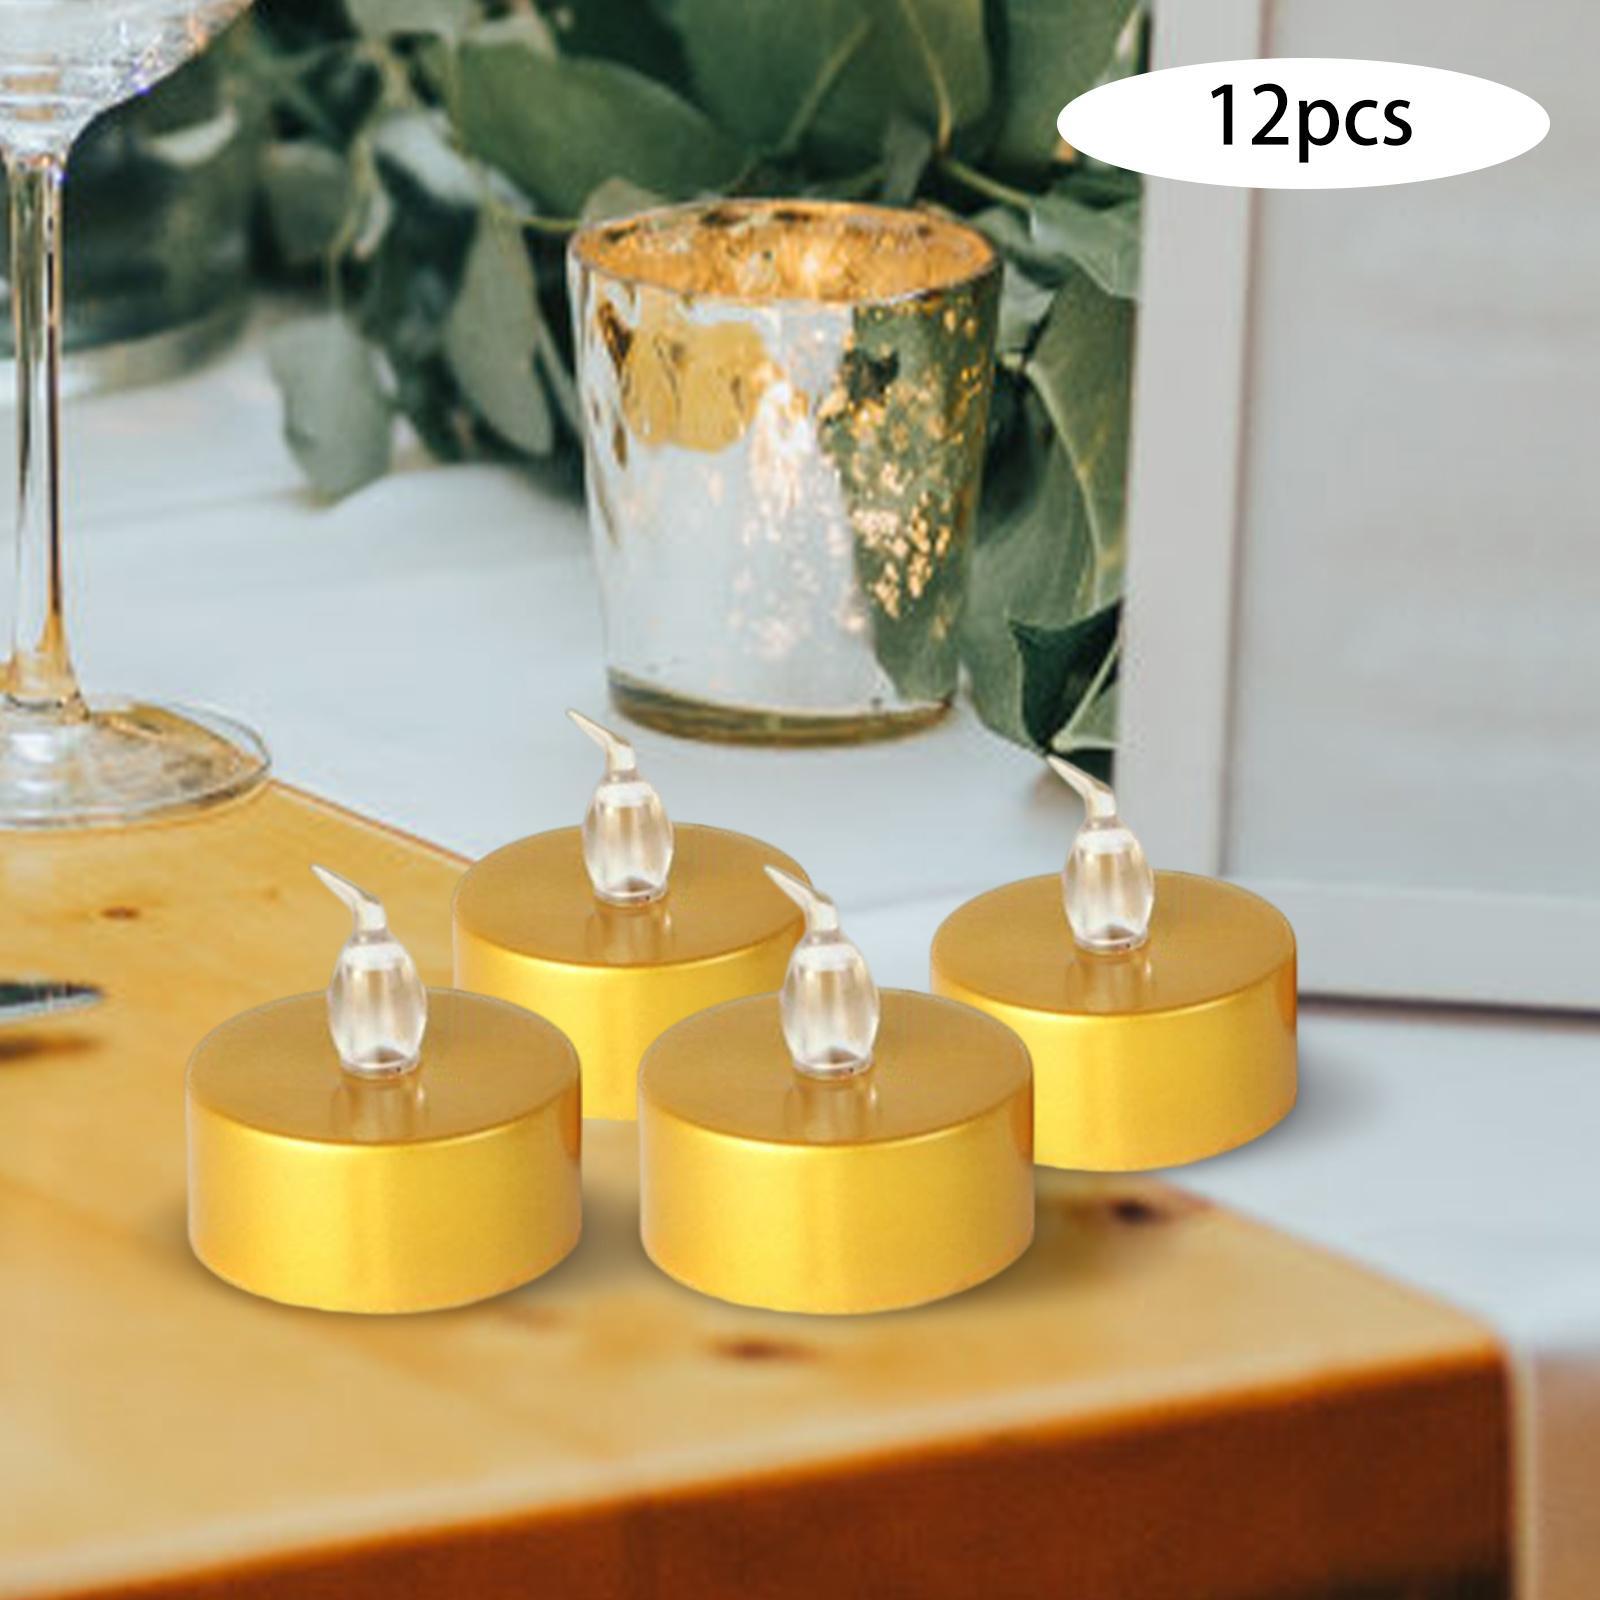 24x Small LED Tealights Candles